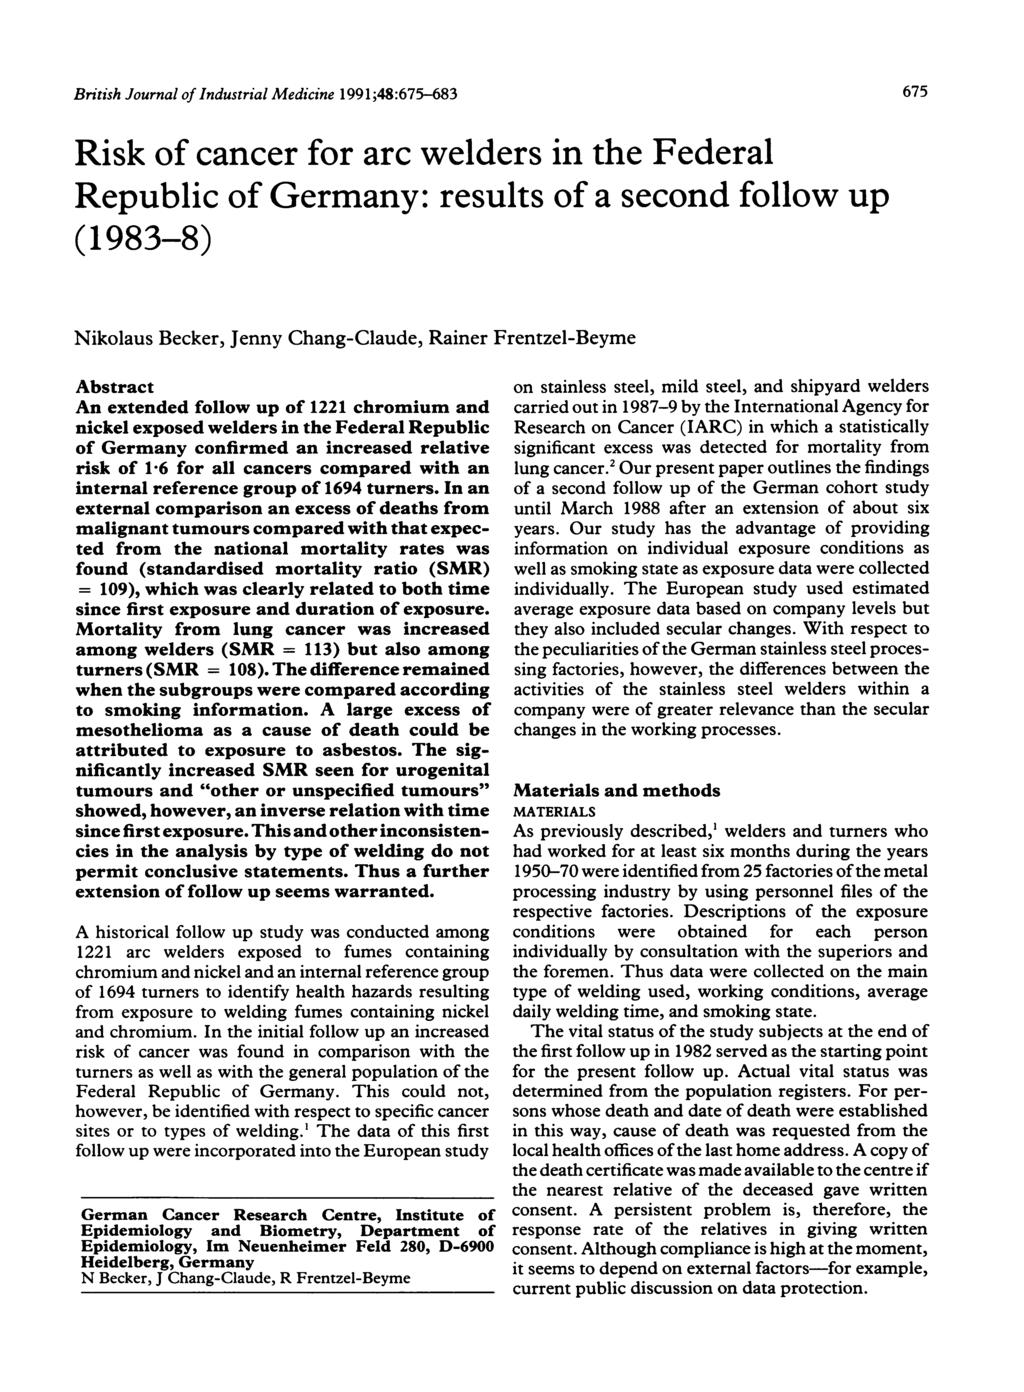 British Journal of Industrial Medicine 1991;48:675-683 Risk of cancer for arc welders in the Federal Republic of Germany: results of a second follow up (1983-8) 675 Nikolaus Becker, Jenny